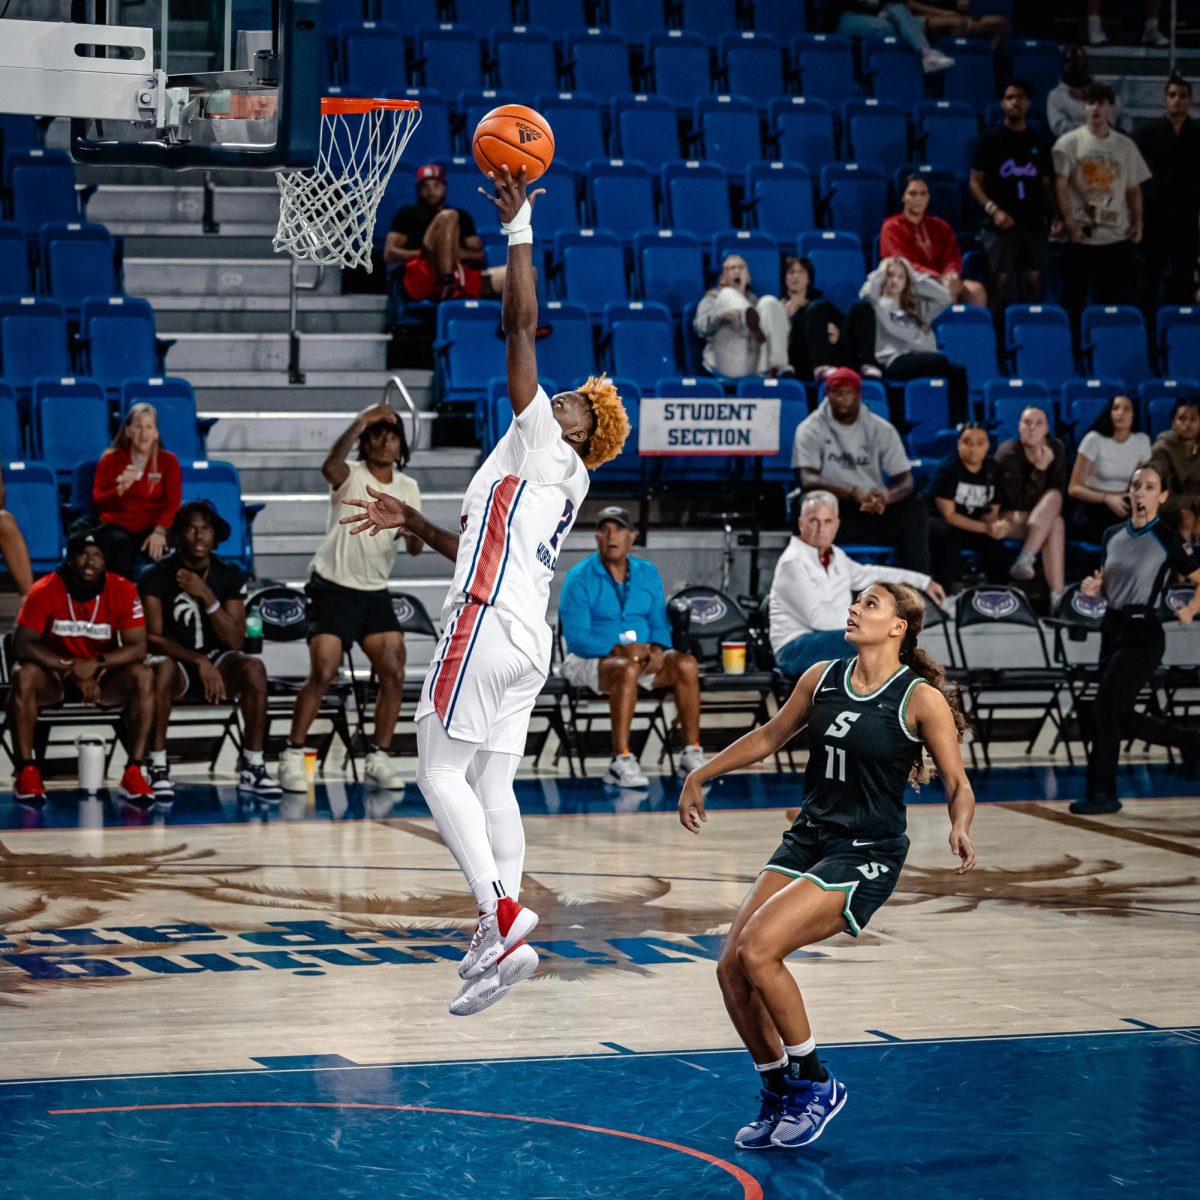 FAU+sophomore+guard+Aniya+Hubbard+%28%232%29+goes+up+for+the+layup+in+the+last+minutes+against+Stetson+during+the+Owls+50-39+comeback+home+win+on+Monday%2C+Nov.+20%2C+2023.